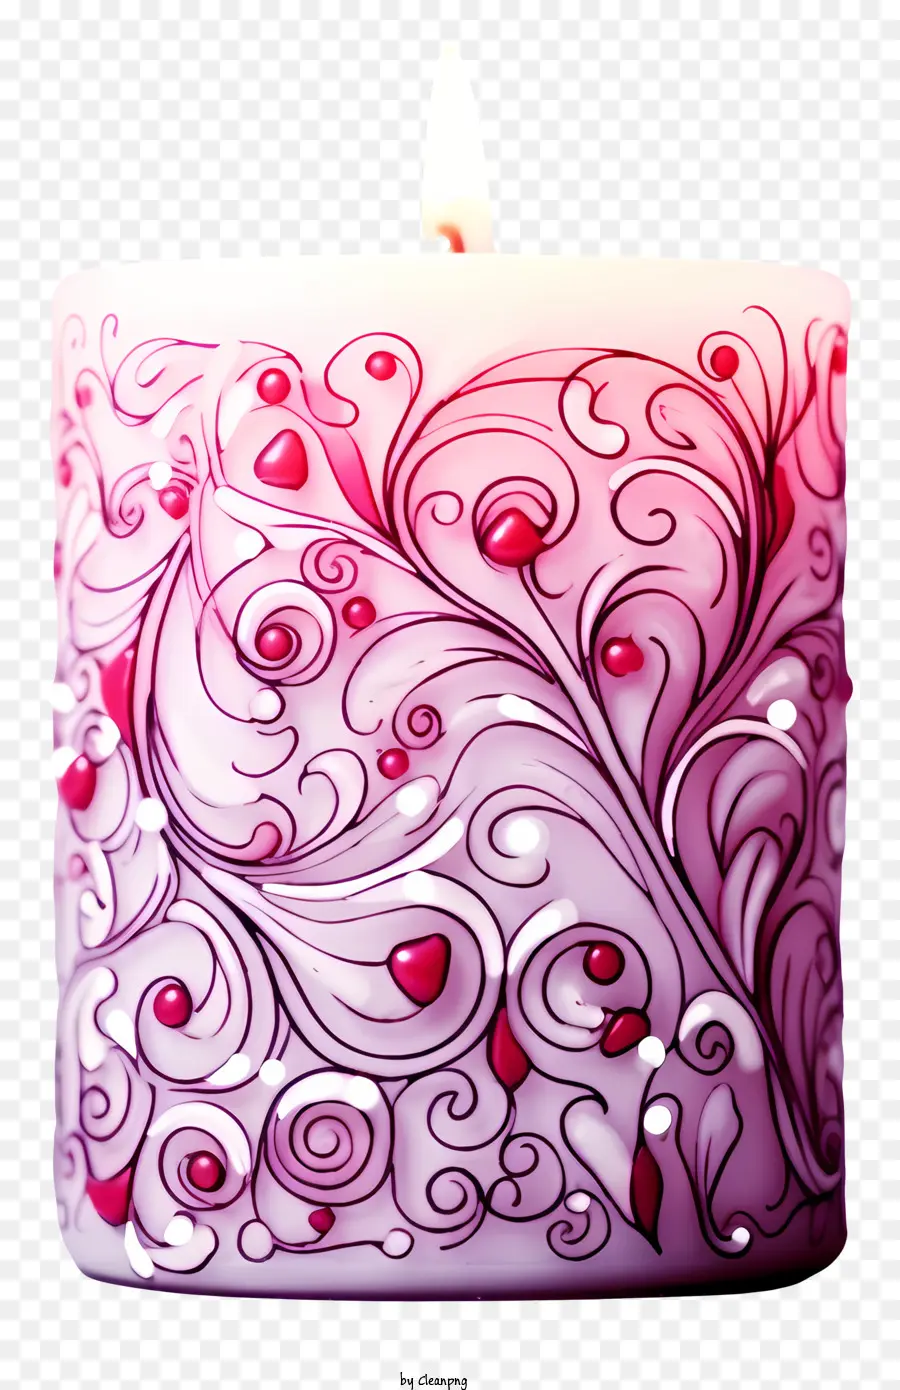 doodle valentine's day candle pink candle swirl design heart-shaped candle romantic candle